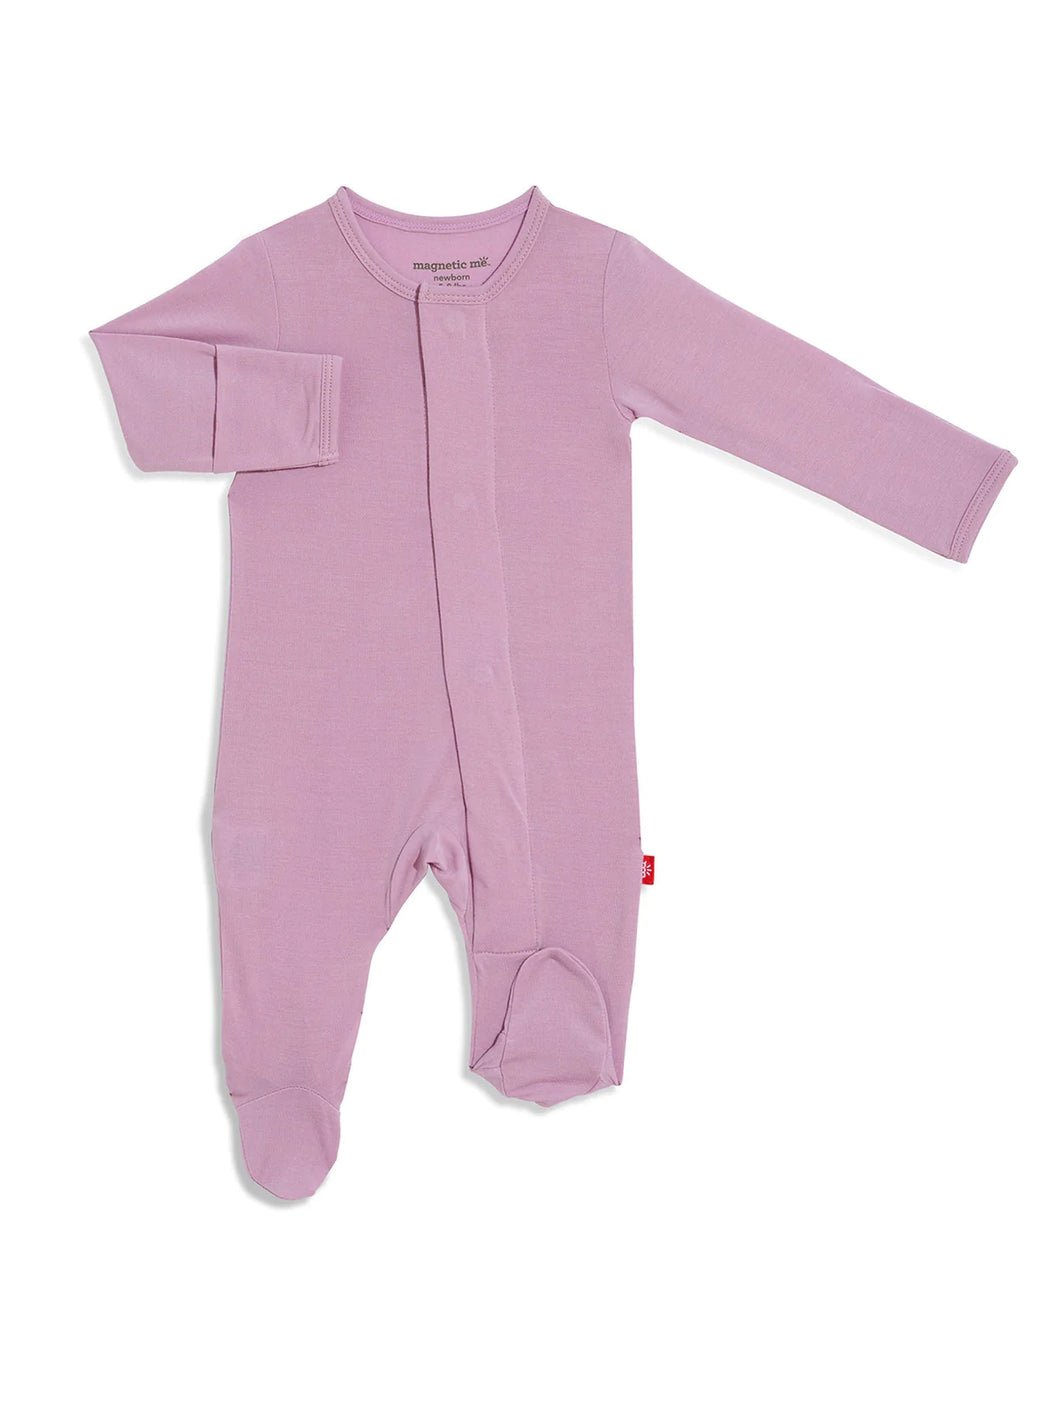 Fragrant Lilac Modal Magnetic Footie - 6-9 Month